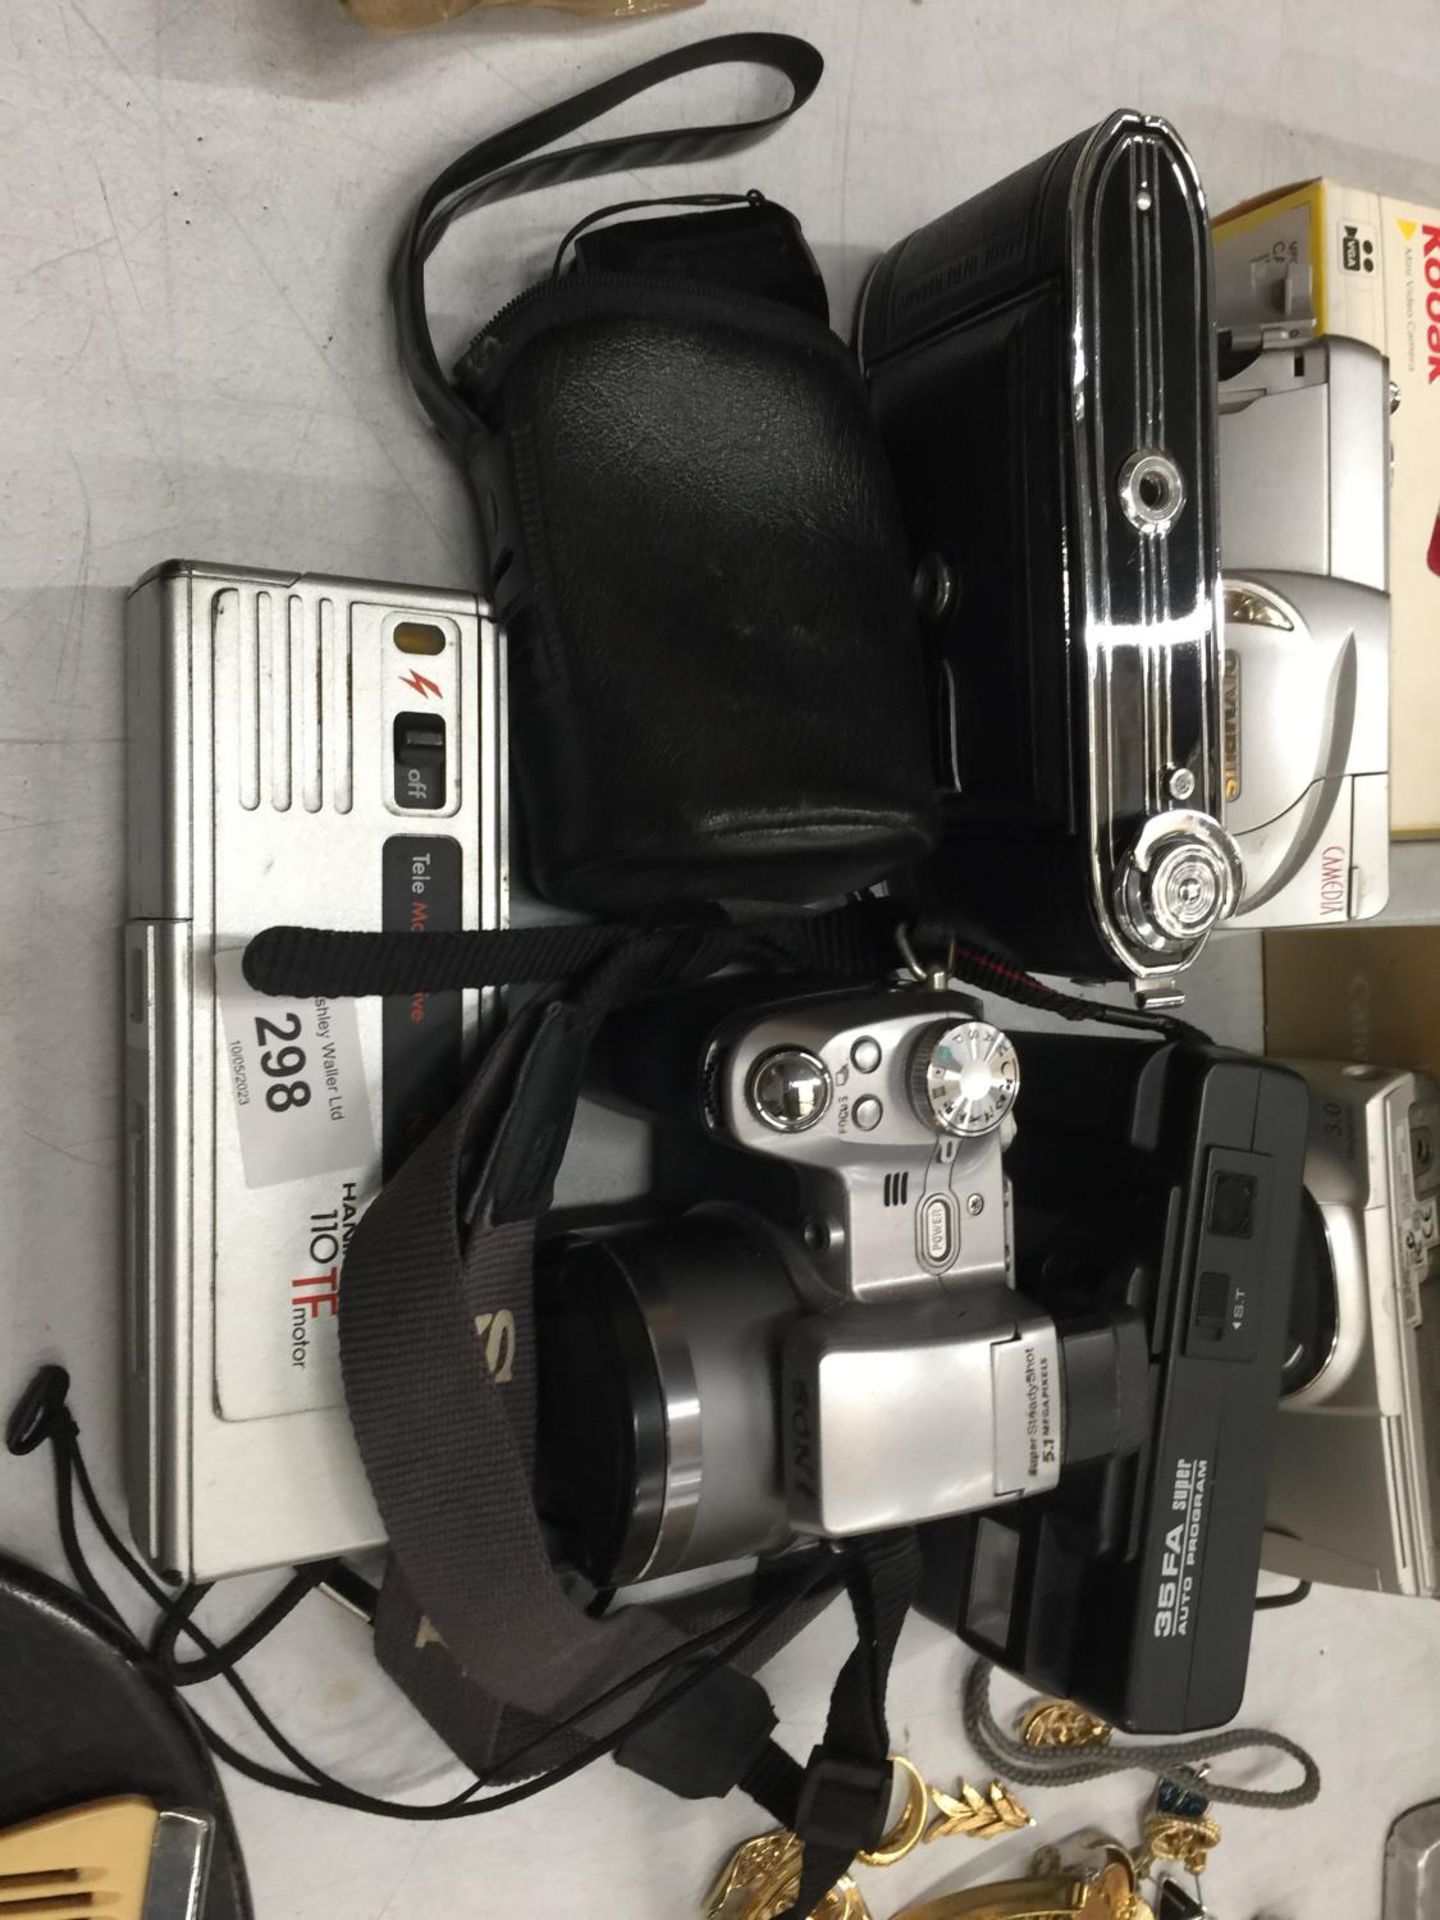 A QUANTITY OF CAMERAS TO INCLUDE A HANIMEX 110 TF MOTOR, A SONY SUPER STEADY SHOT 5.1 PIXELS, AN - Image 3 of 4